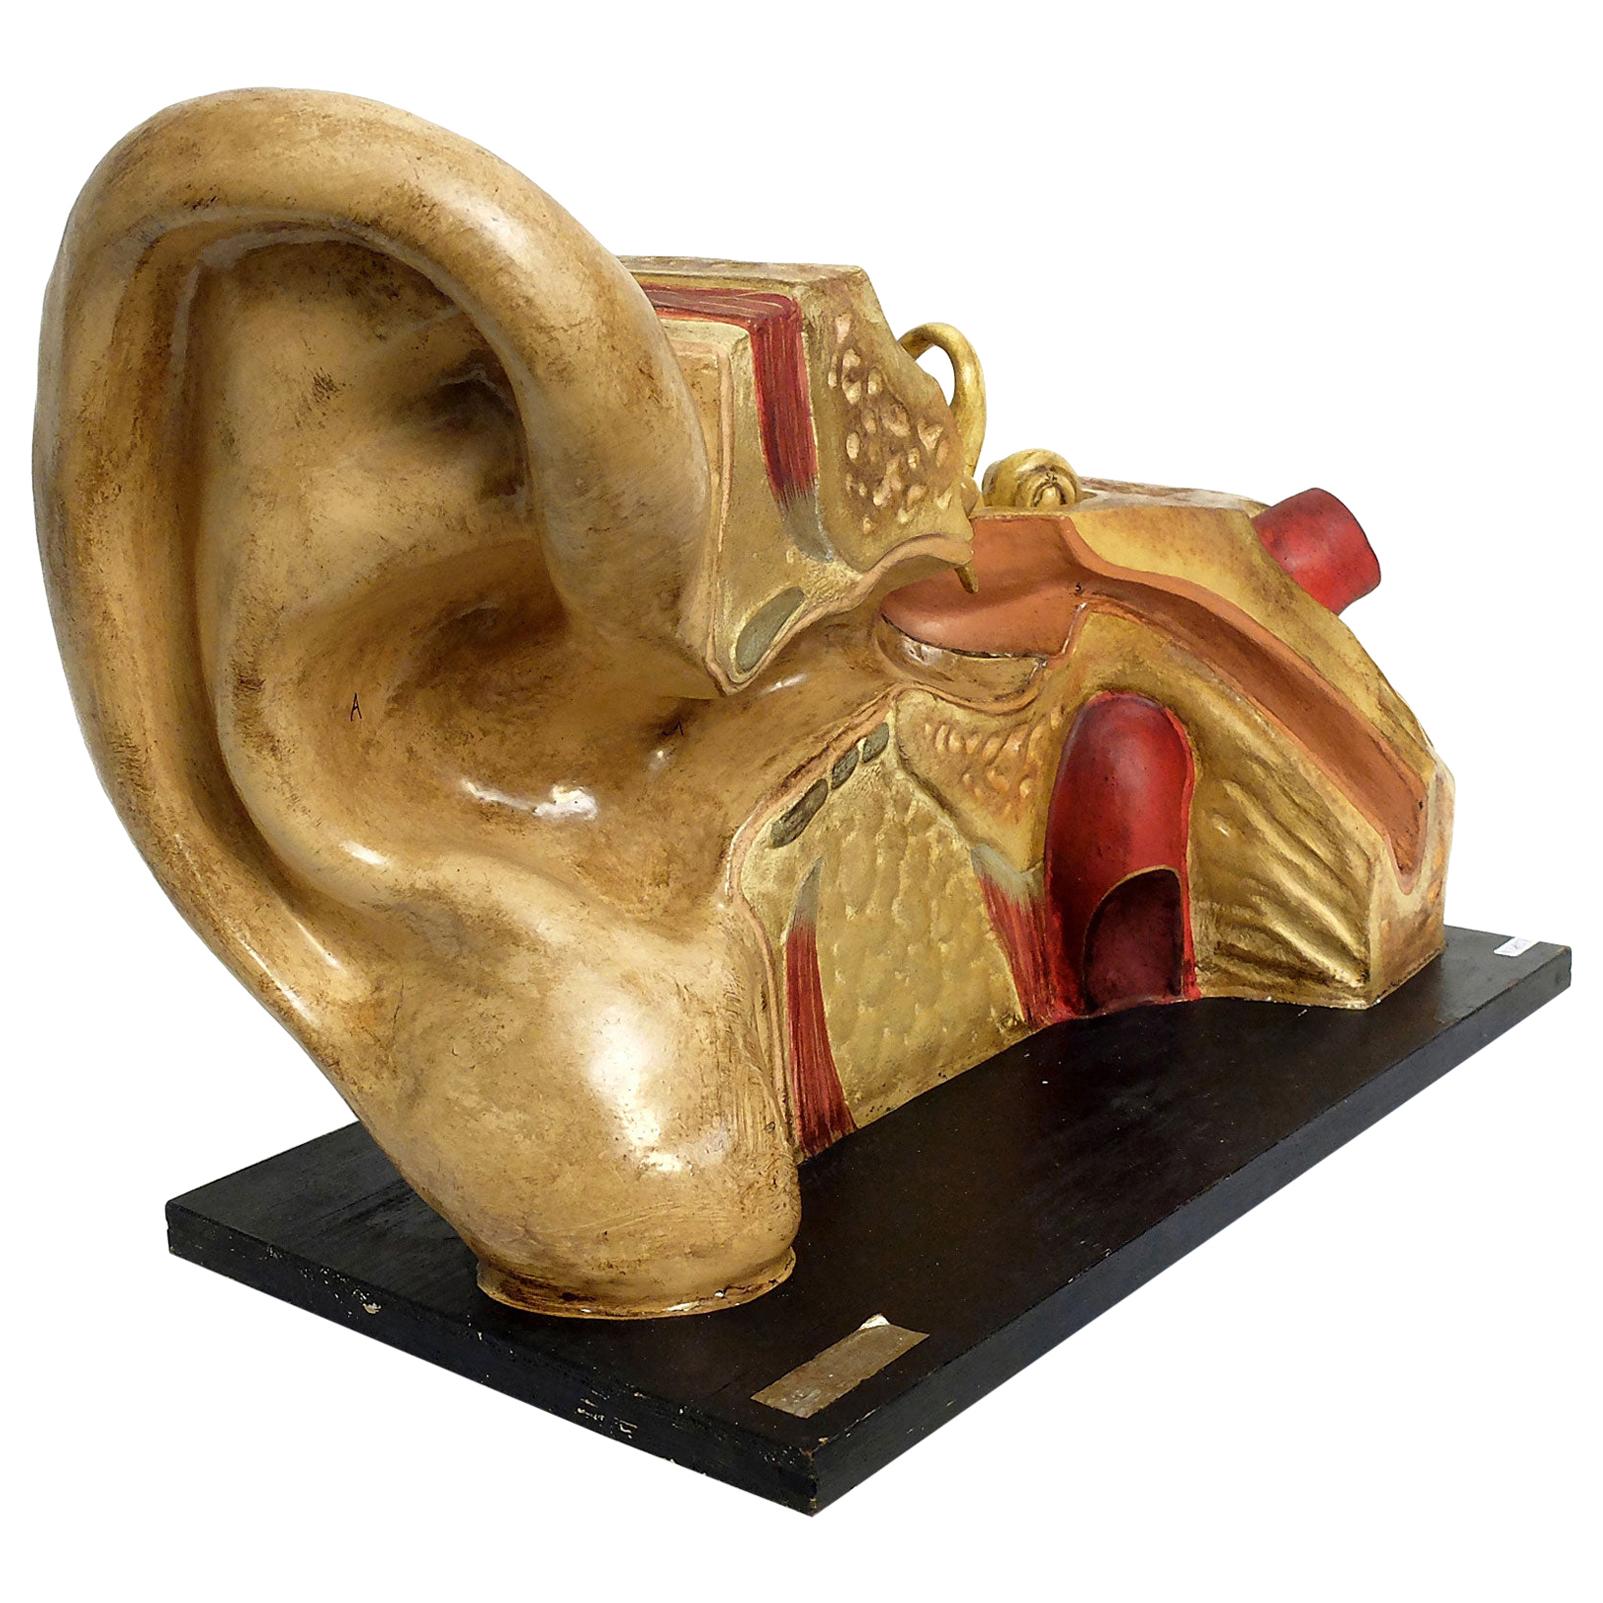 France End of the 19th Century, an Anatomic Model External and Internal Ear